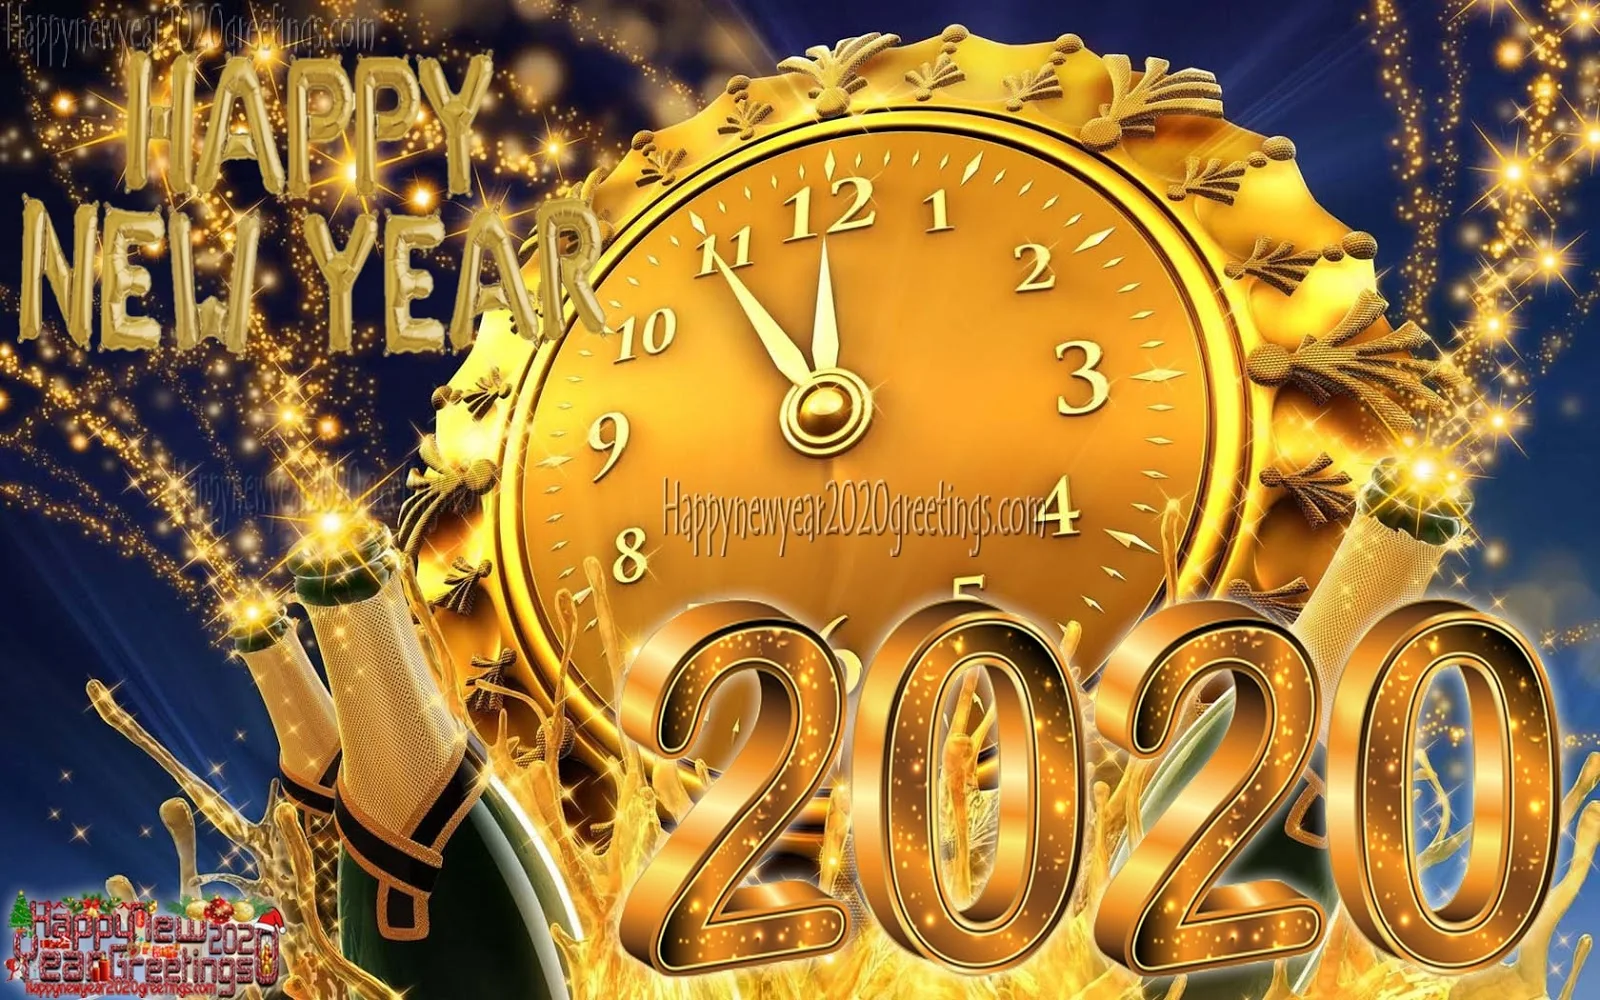 Happy New Year 2020 Images HD 1080p - New Year 2020 Ultra HD 